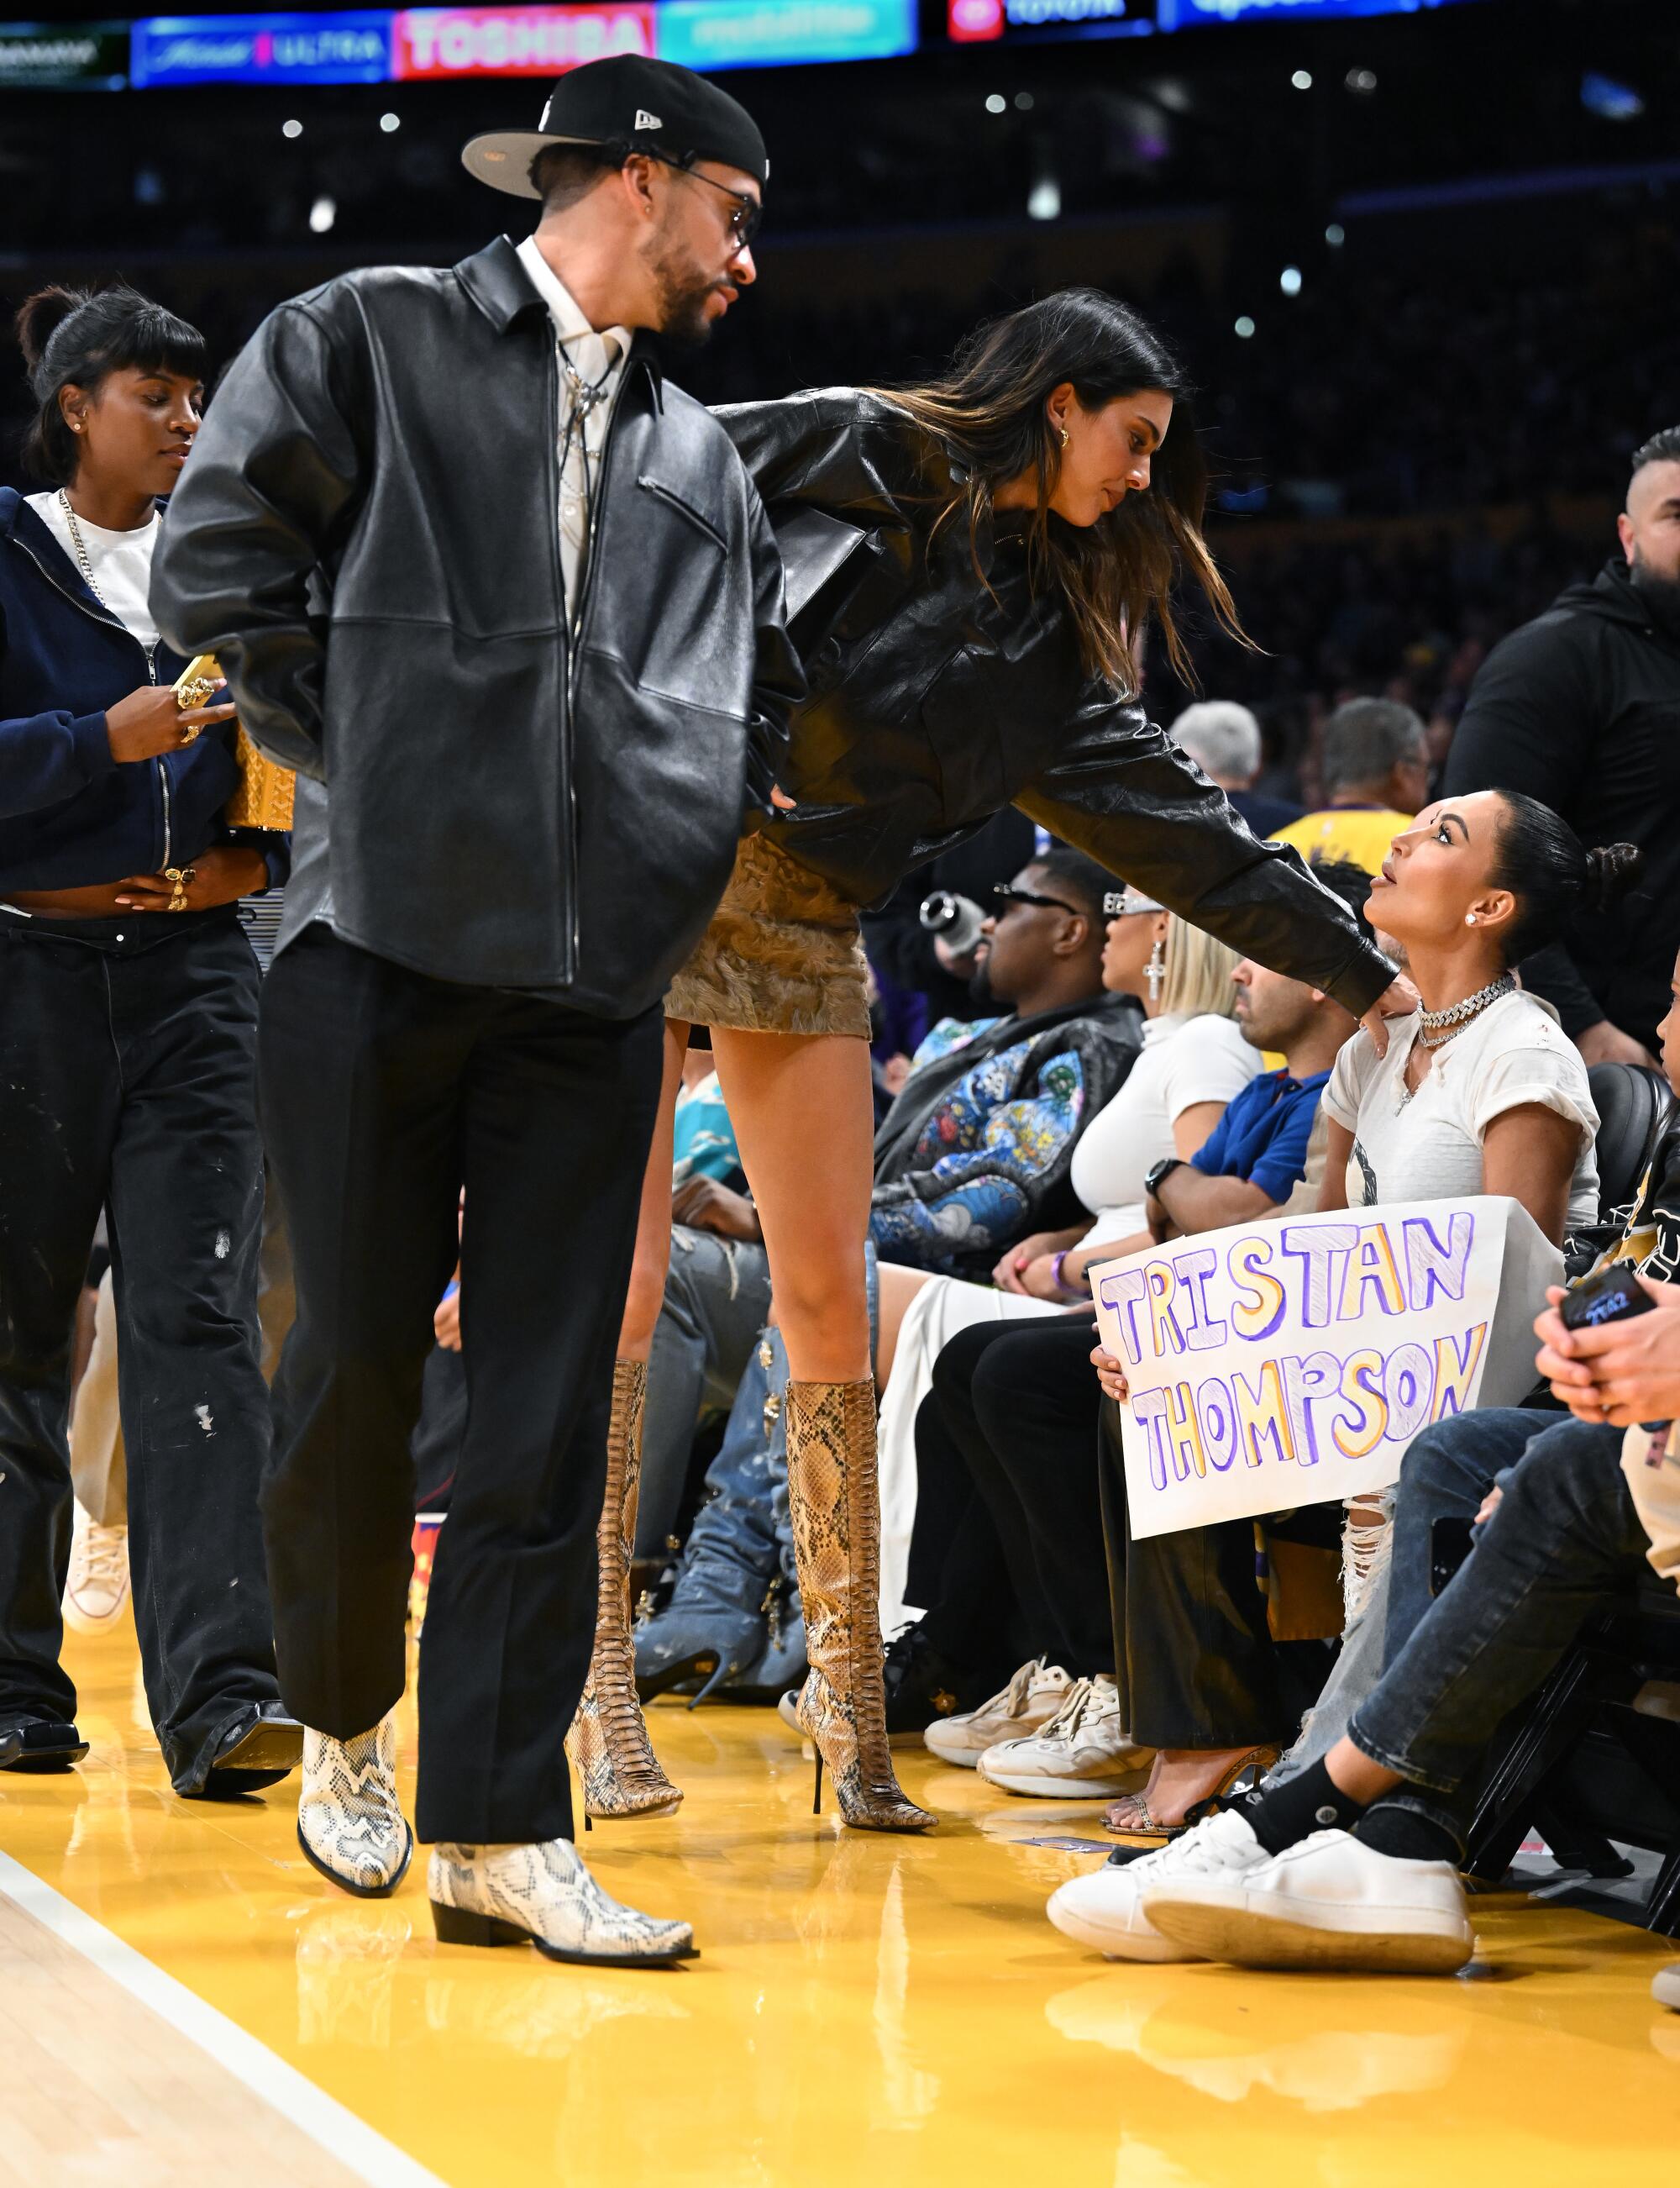 kendall jenner and bad bunny at the lakers game tonight